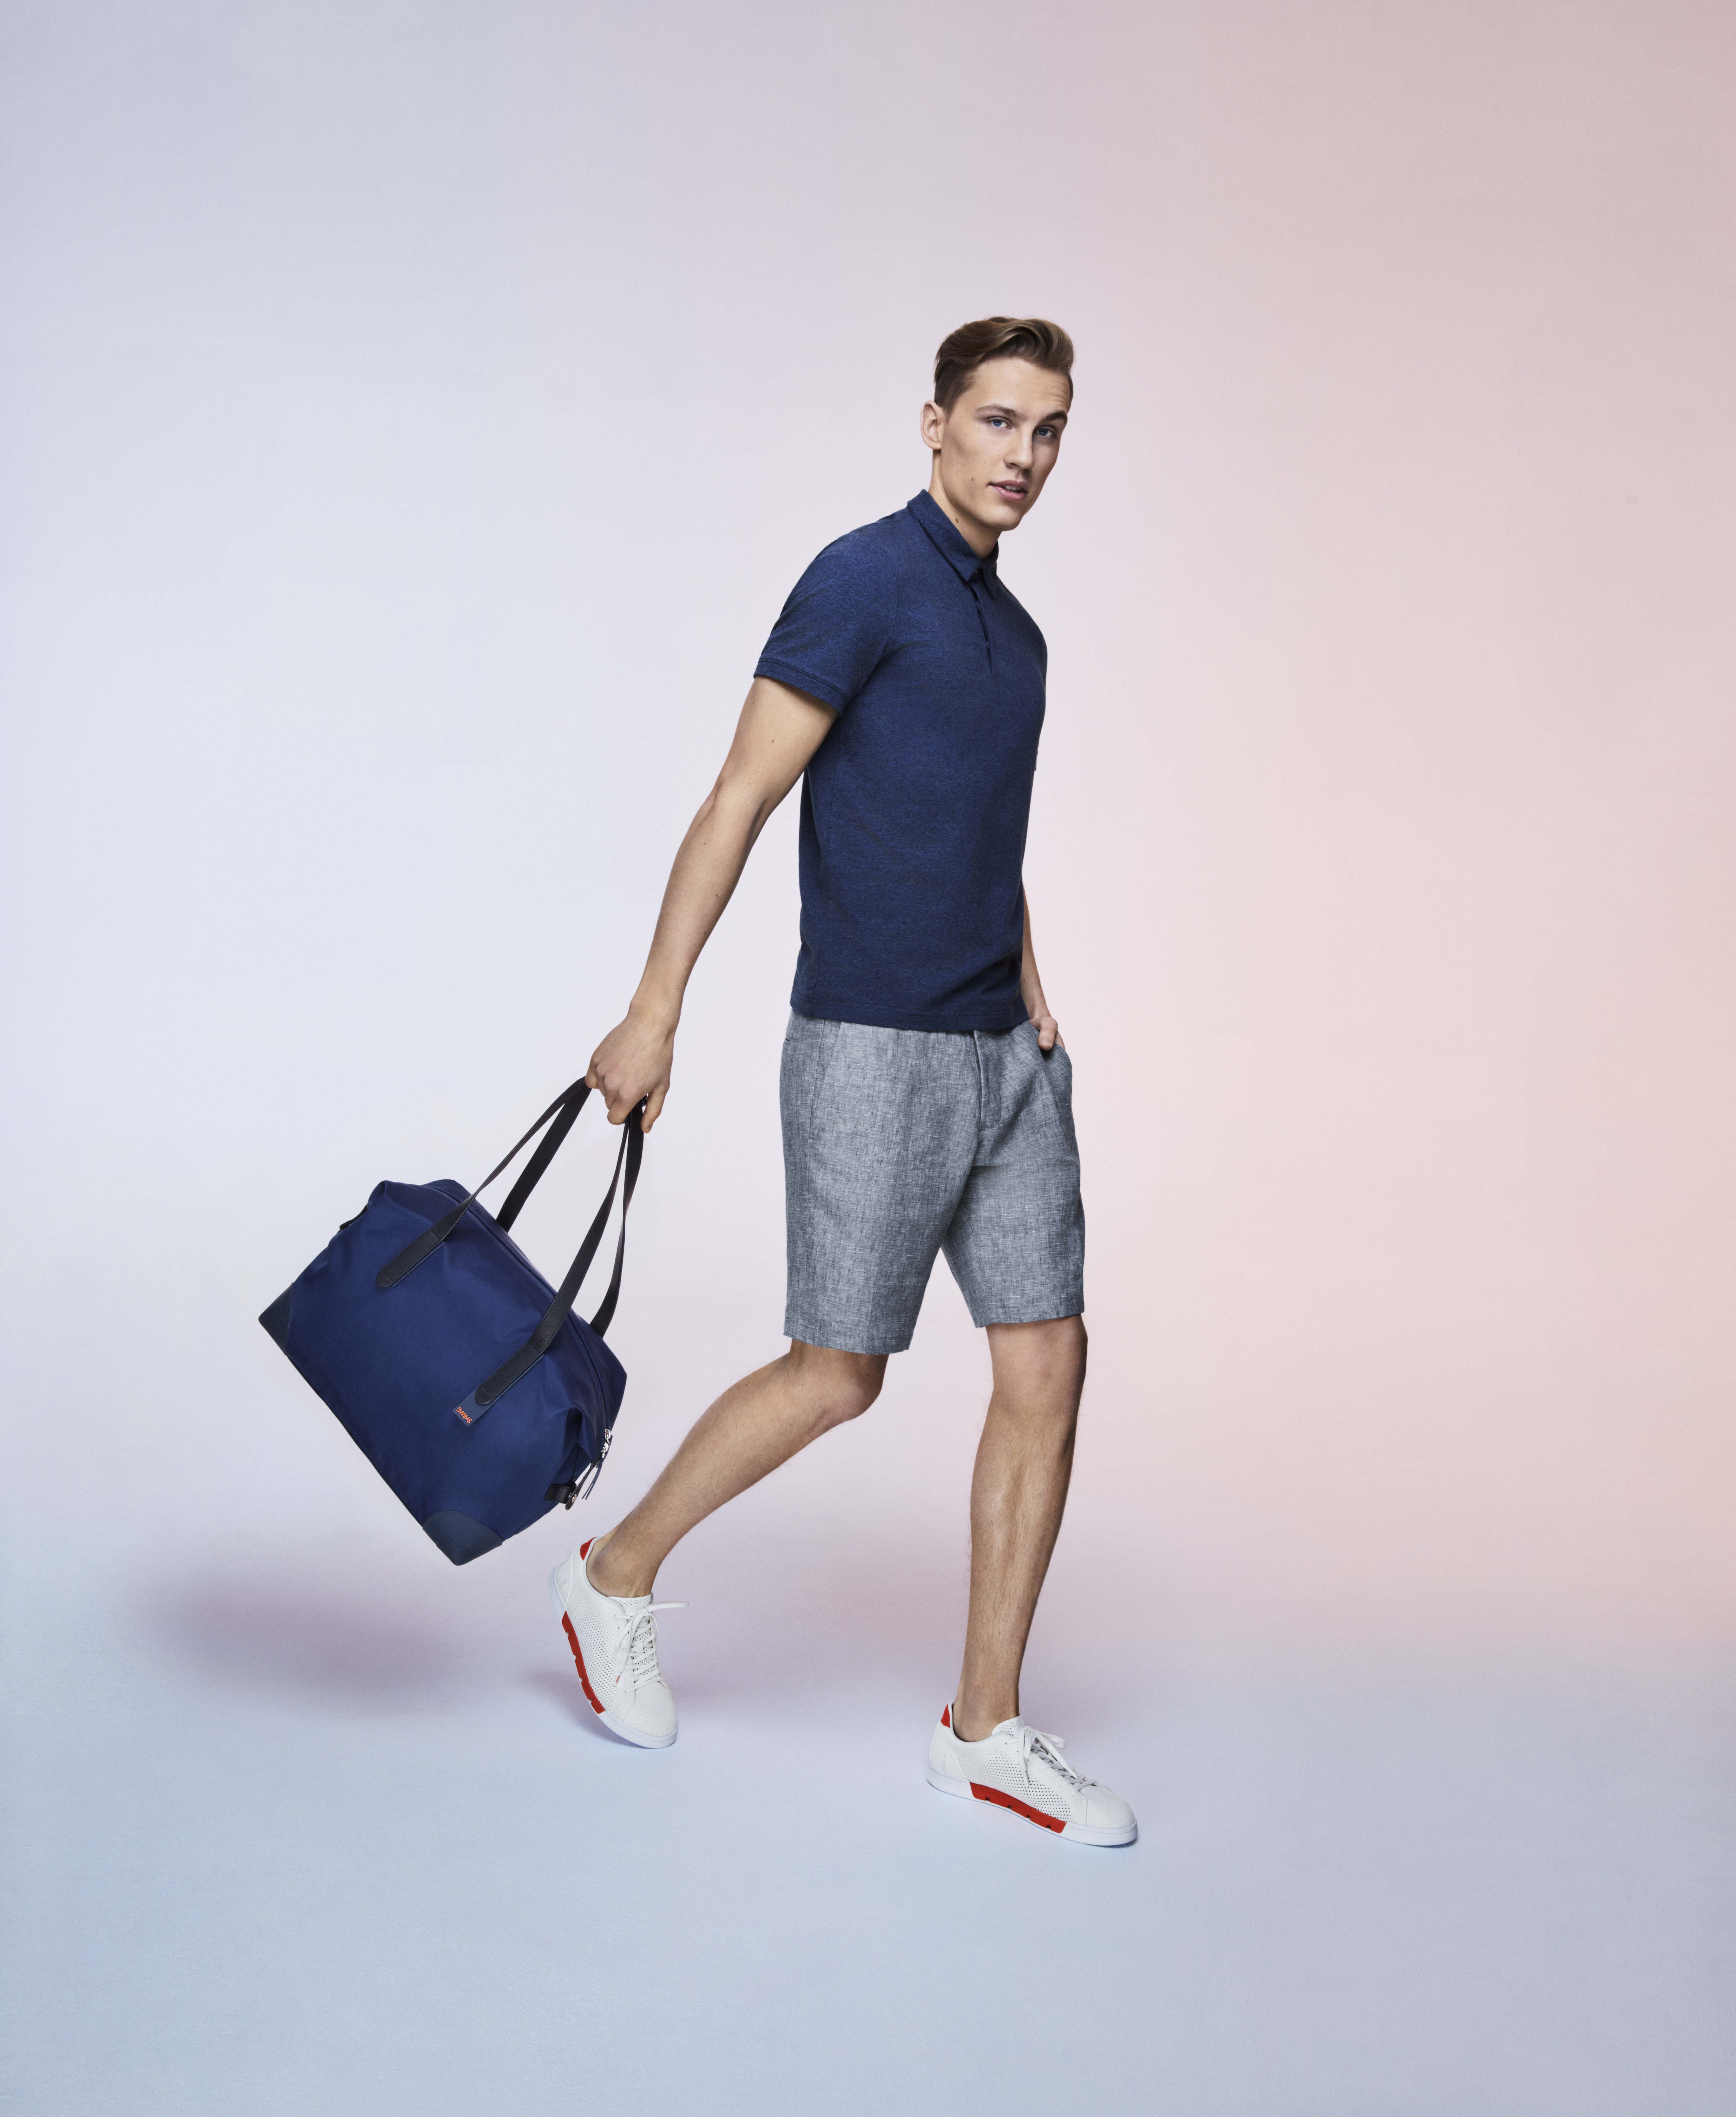 swims chausse homme 2